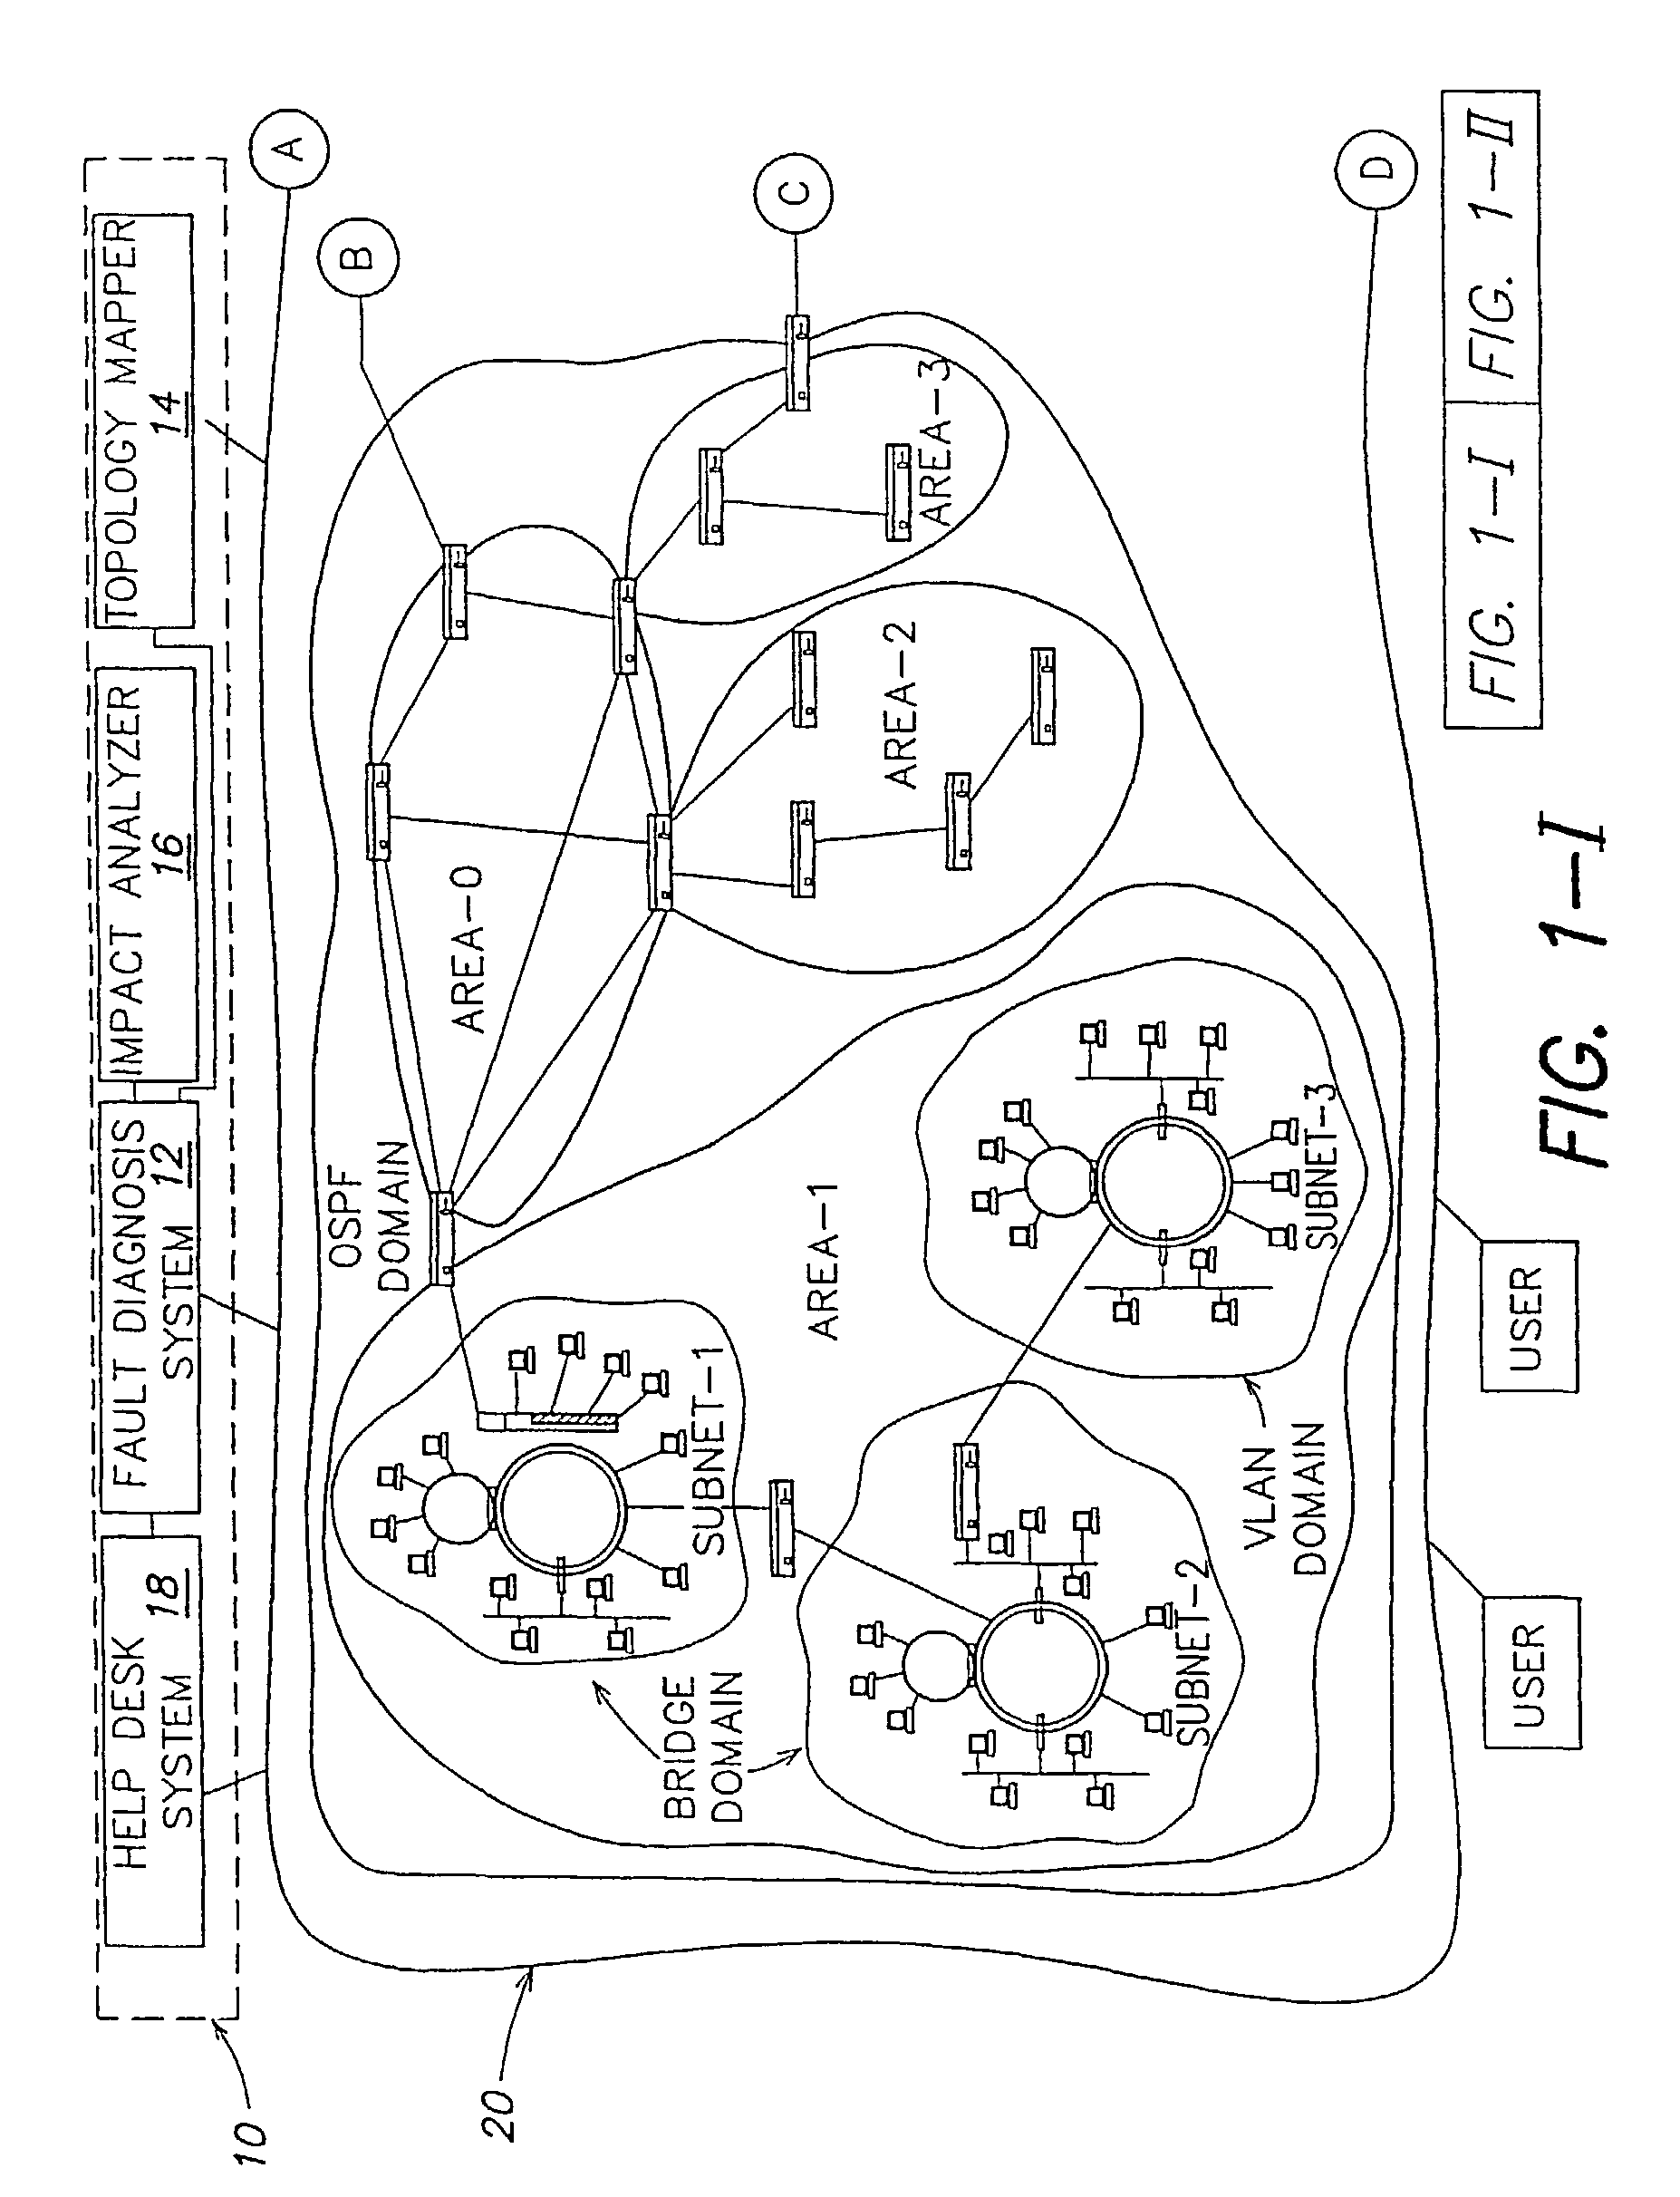 Help desk systems and methods for use with communications networks